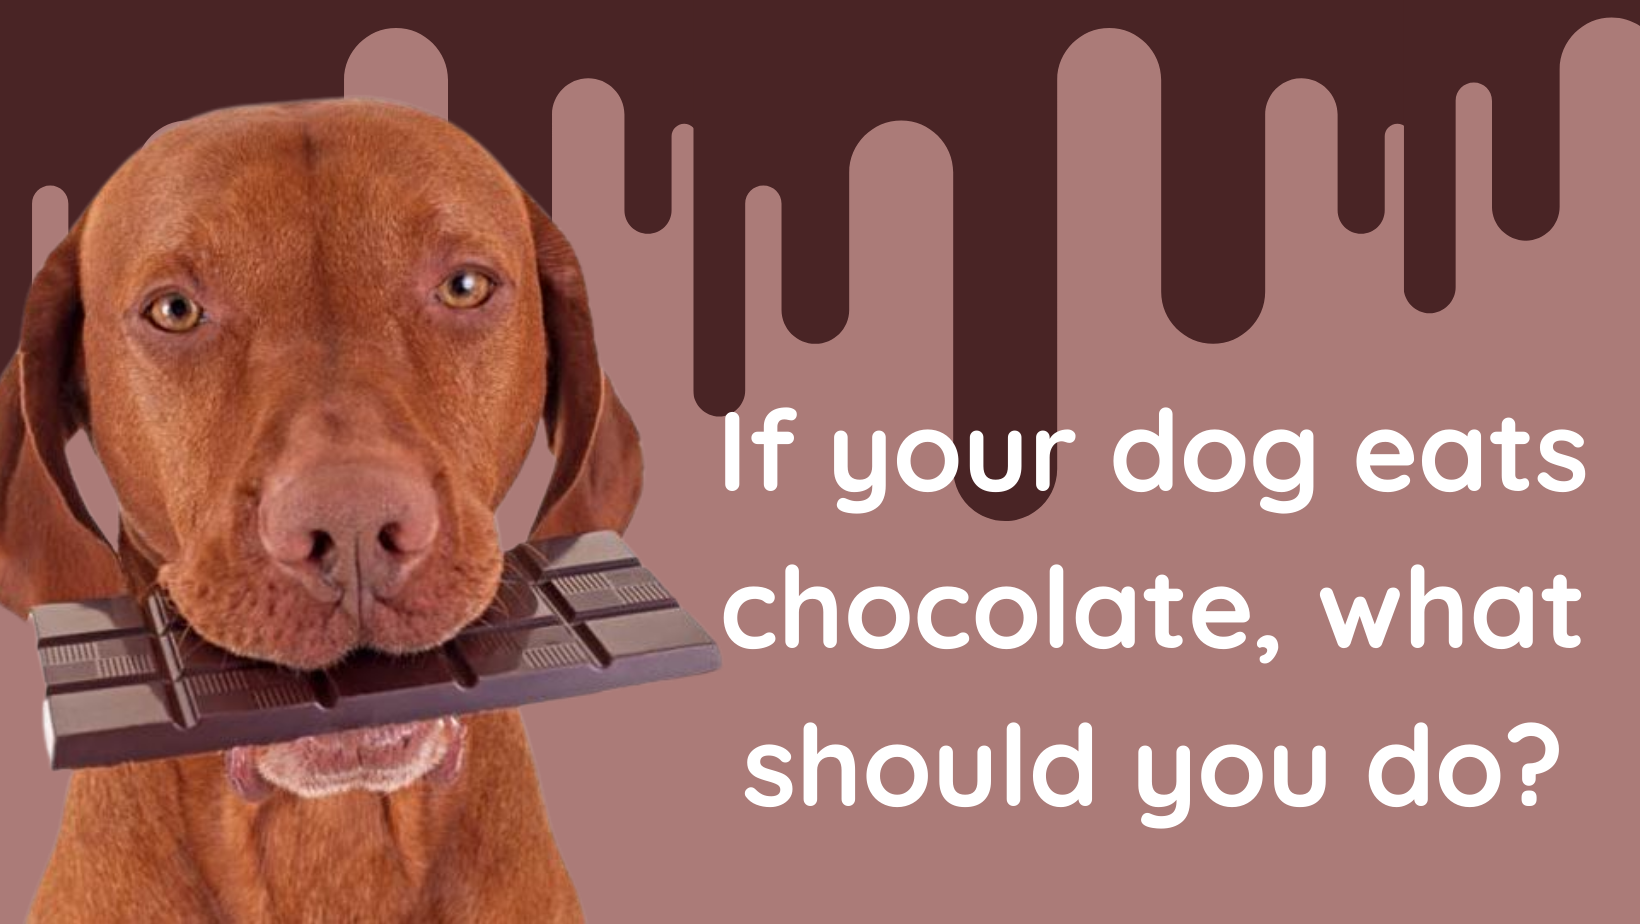 If your dog eats chocolate, what should you do?